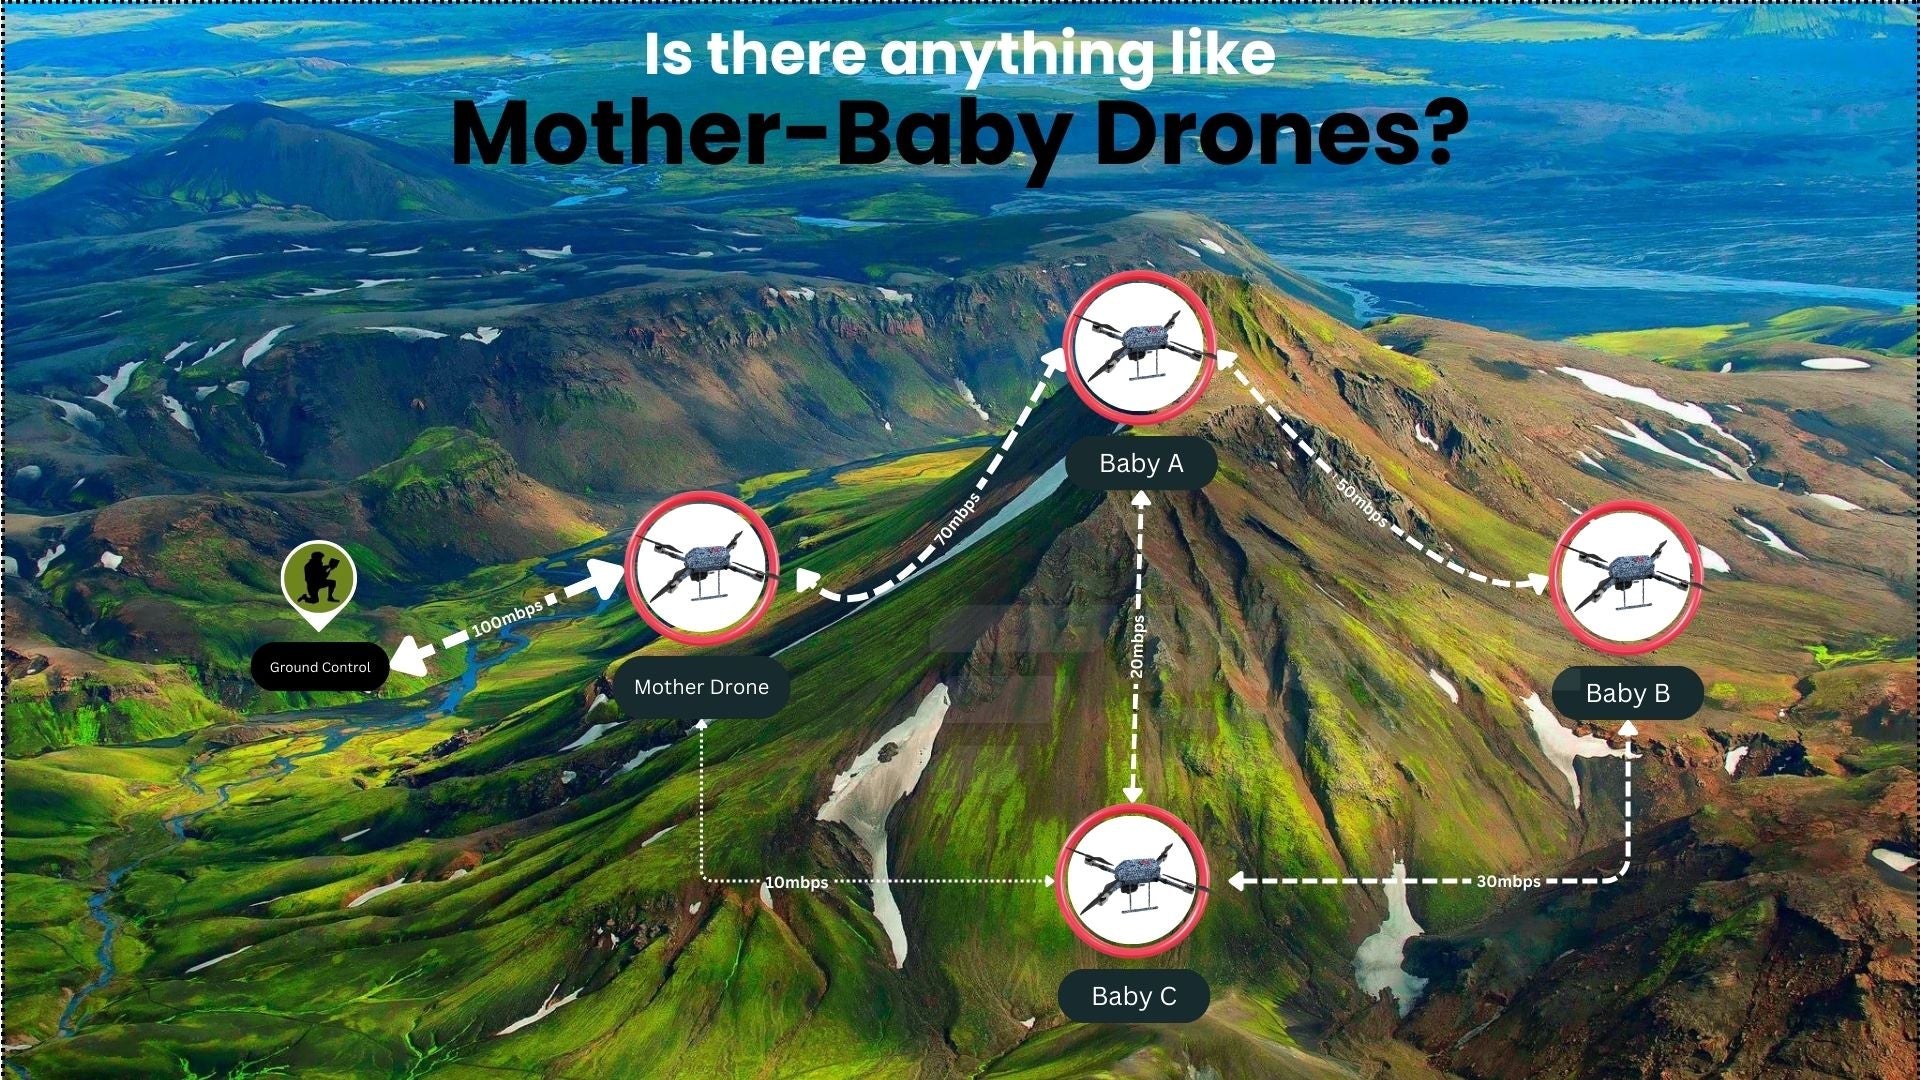 Mother- Baby Drone concept: In-flight launch of Baby drones by Mother drone